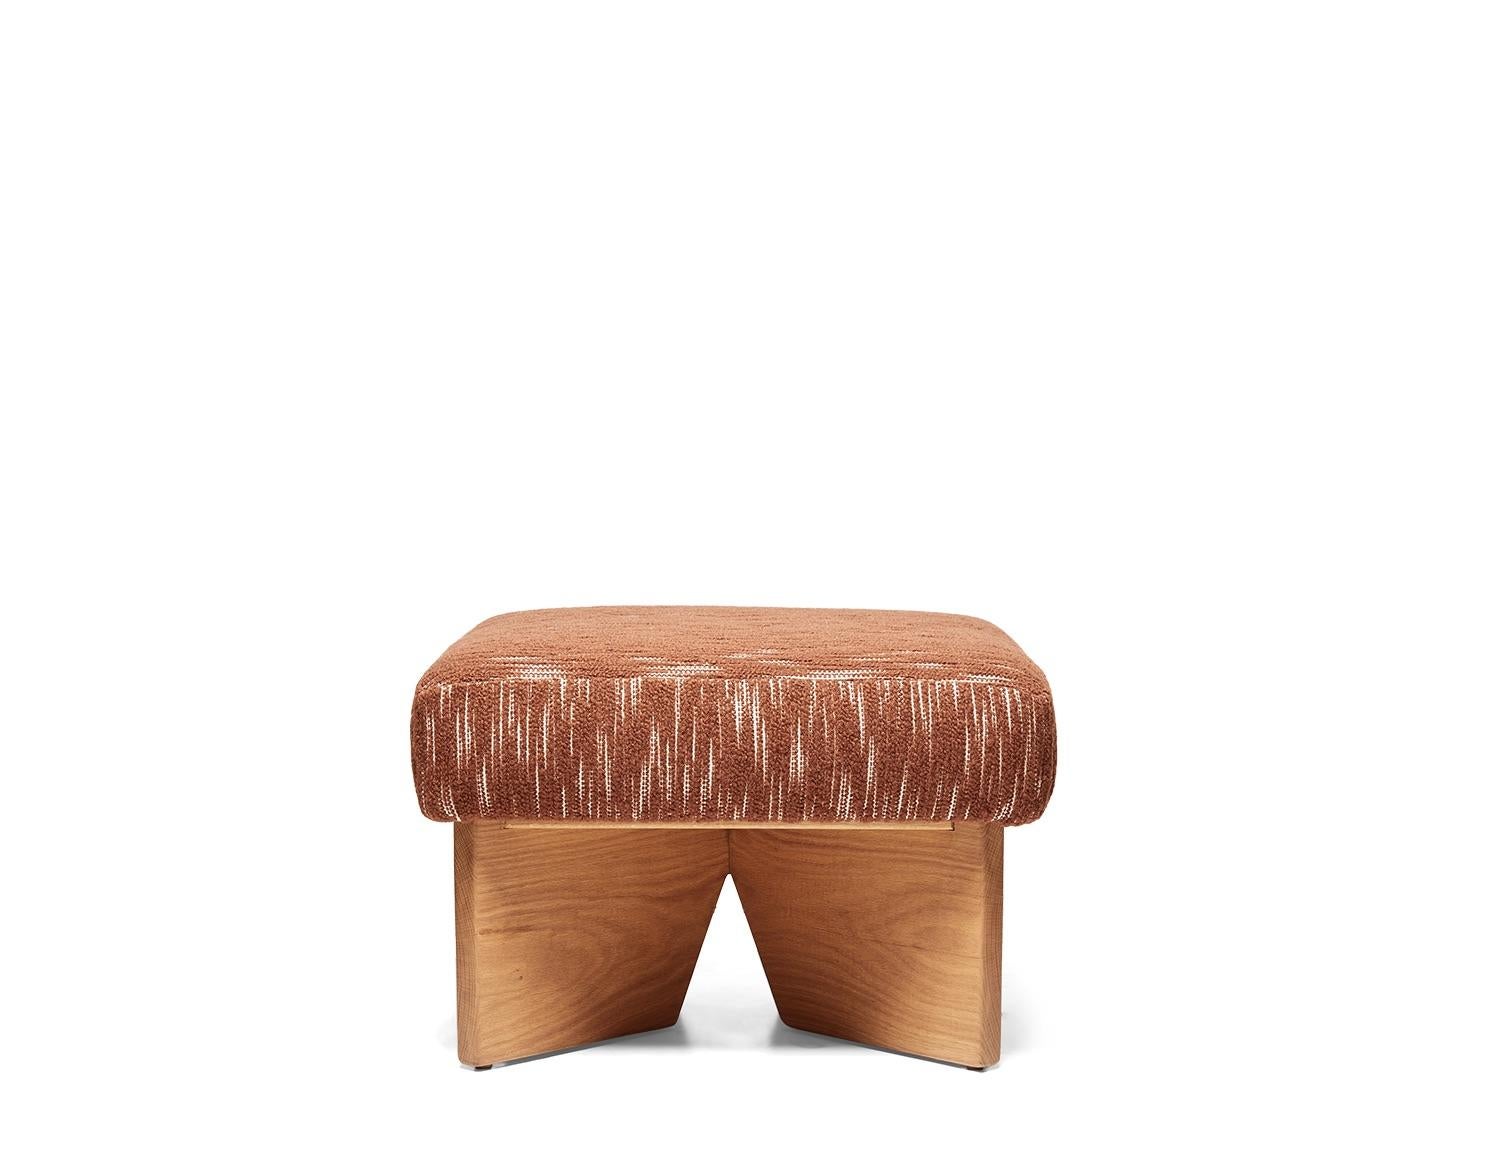 The Portola ottoman has a handcrafted solid wood frame with an attached cushion.

The Lawson-Fenning Collection is designed and handmade in Los Angeles, California. Reach out to discover what options are currently in stock.